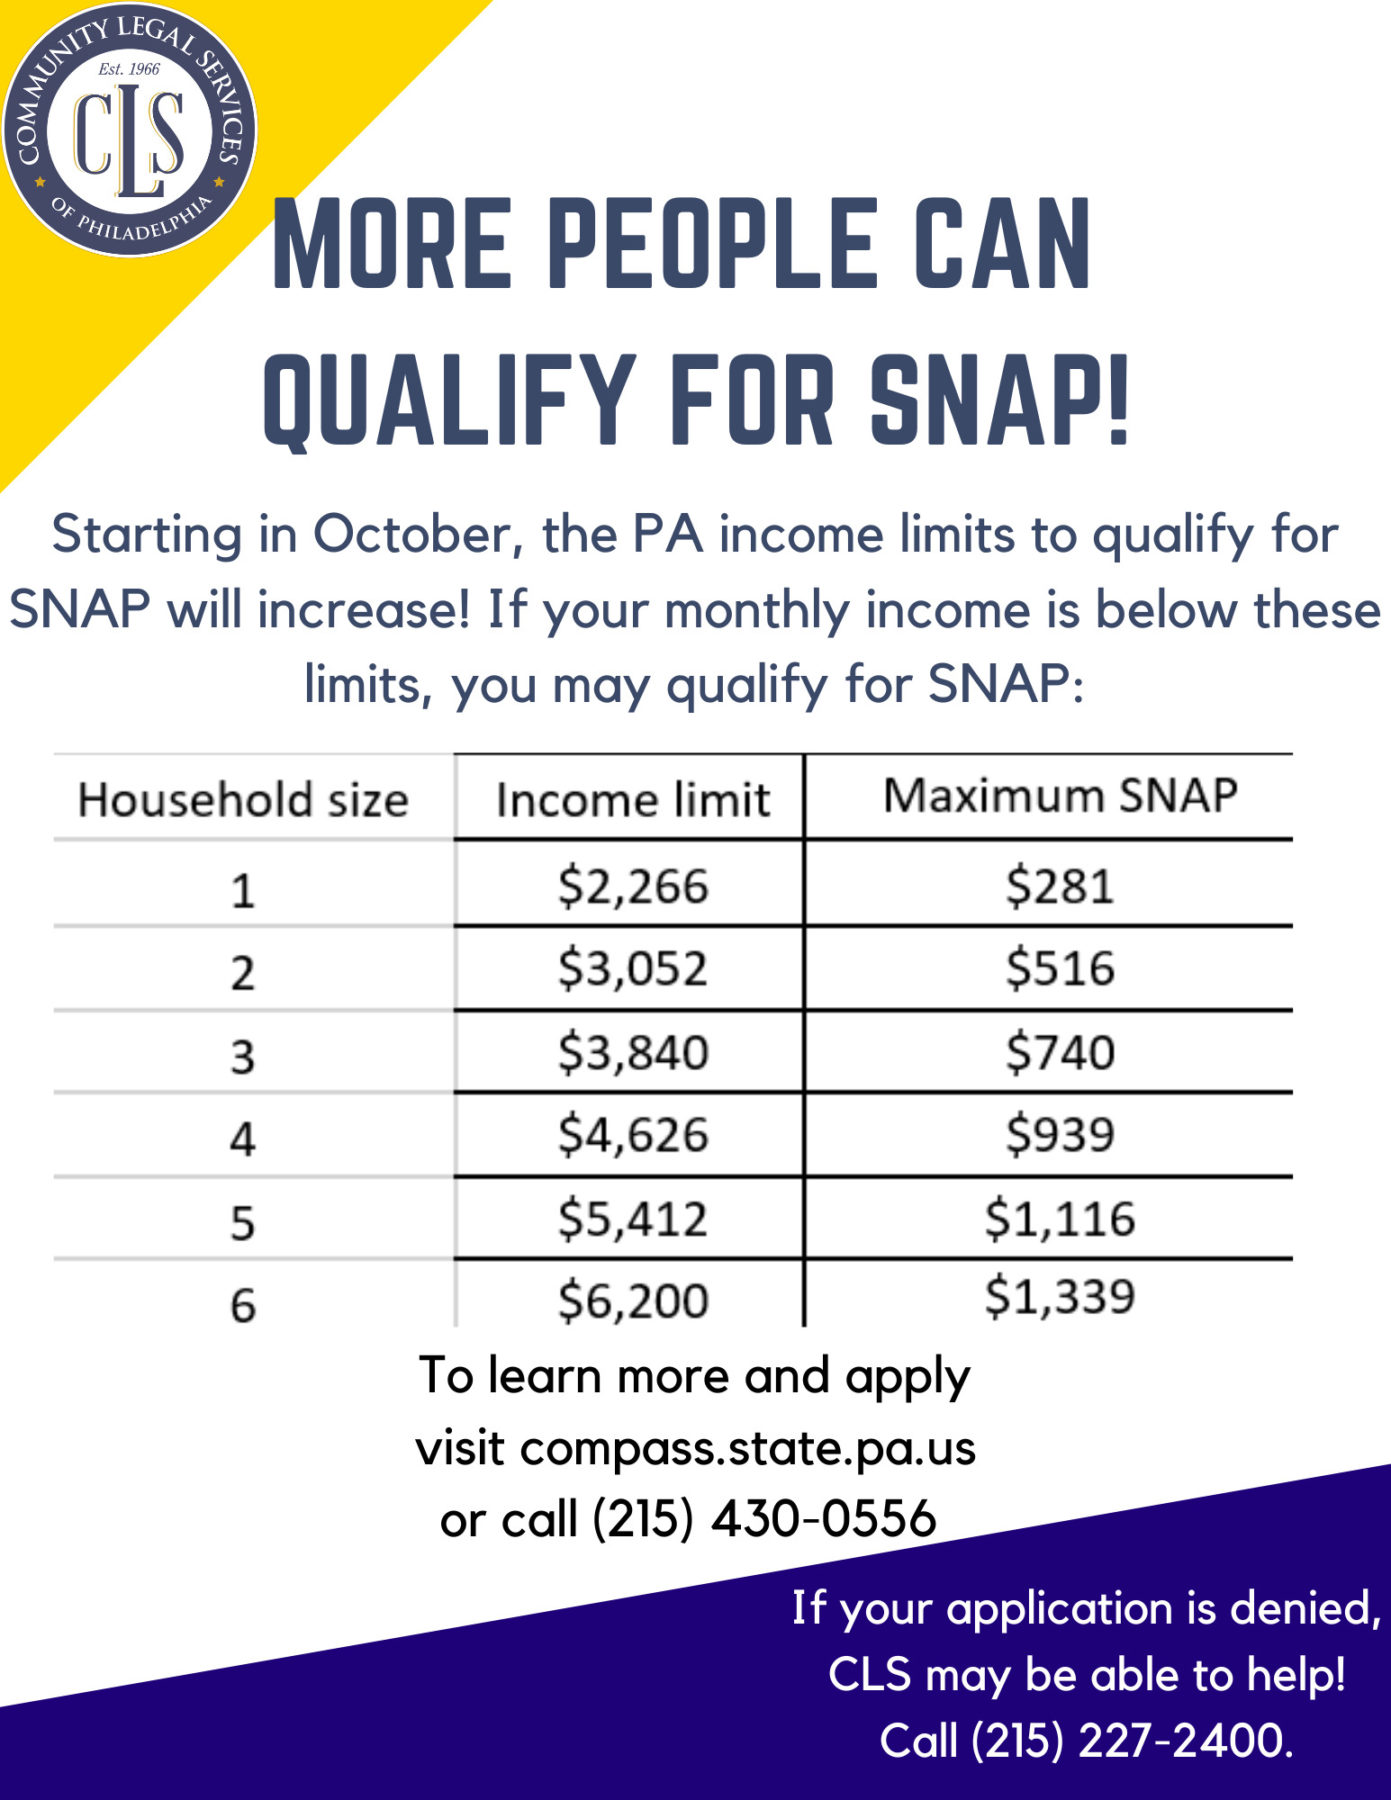 MORE PEOPLE CAN QUALIFY FOR SNAP 